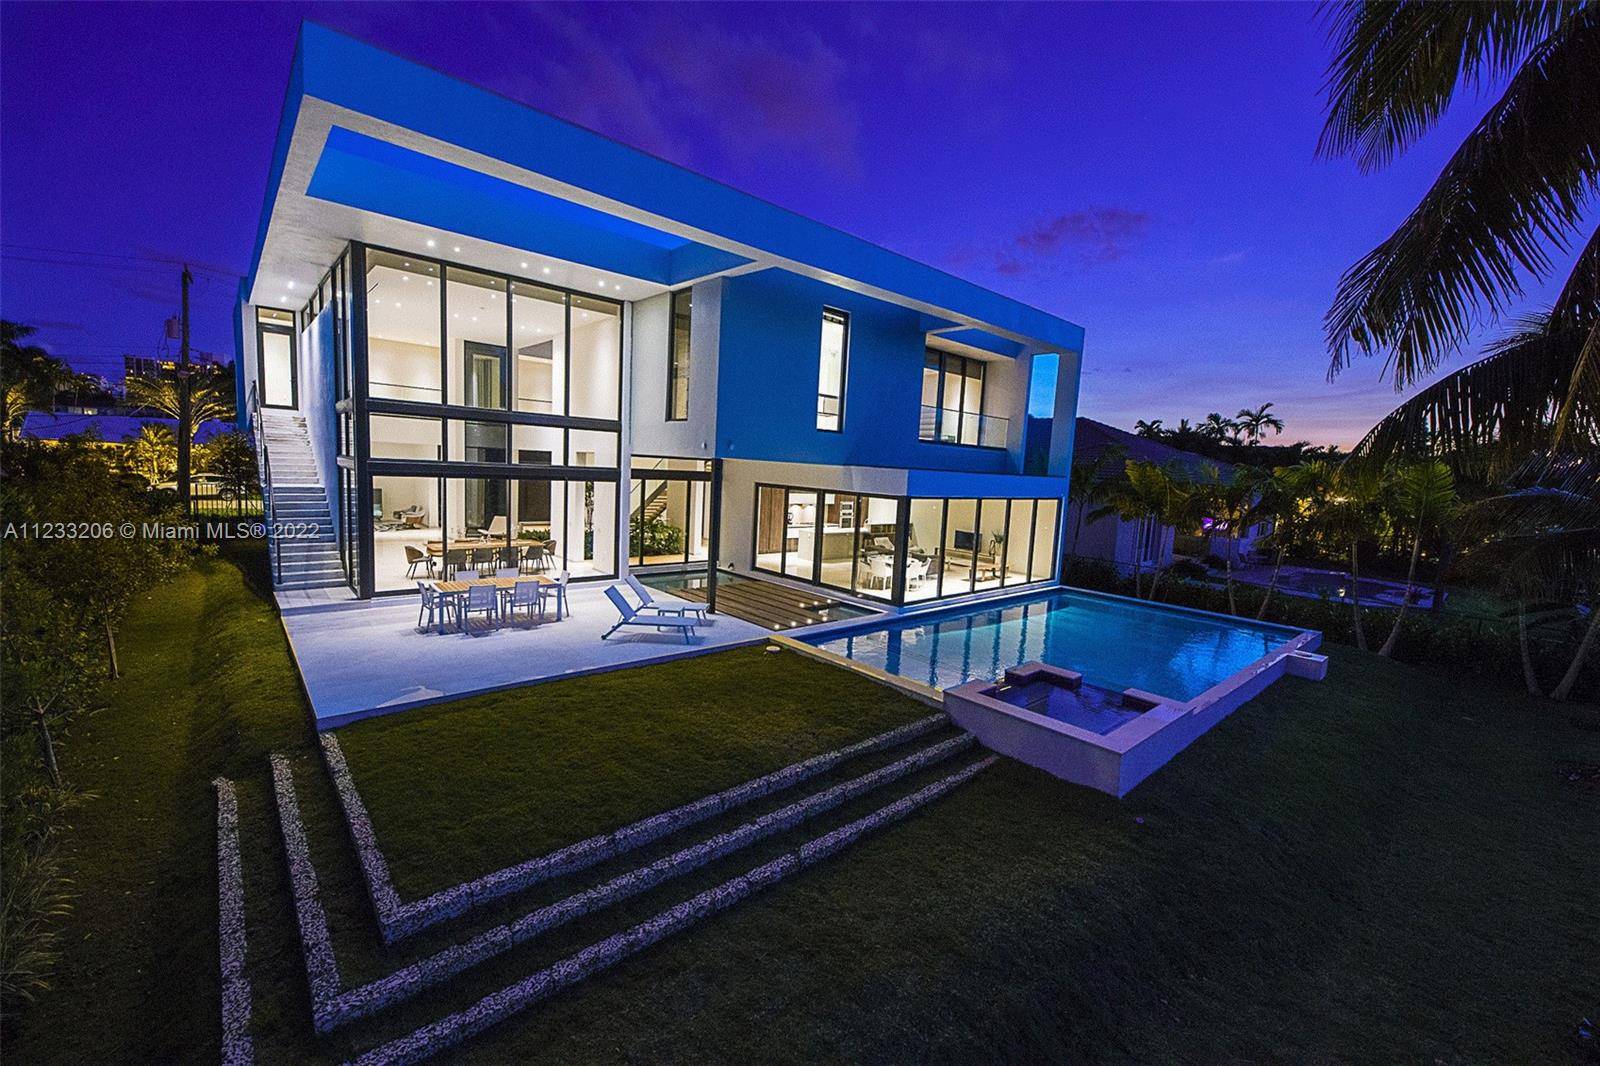 Introducing Sunset Mansion, a 2 story ultra modern, waterfront masterpiece.